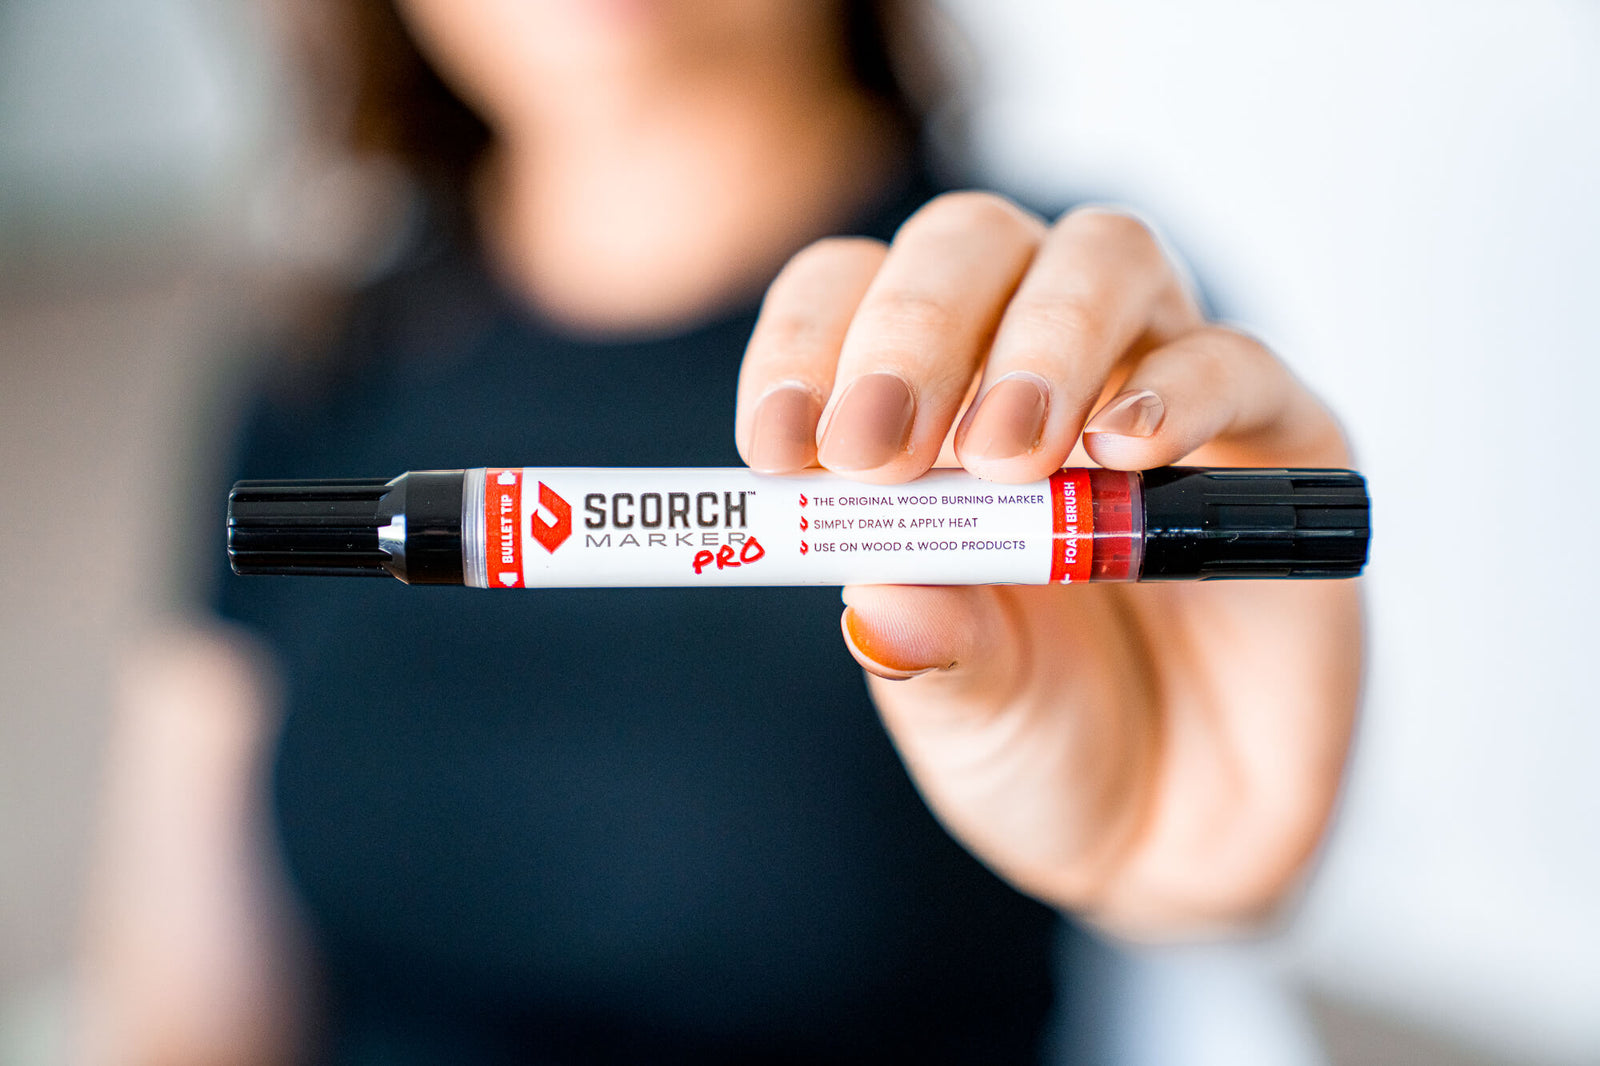 It may be called a wood-burning marker, but the Scorch Marker